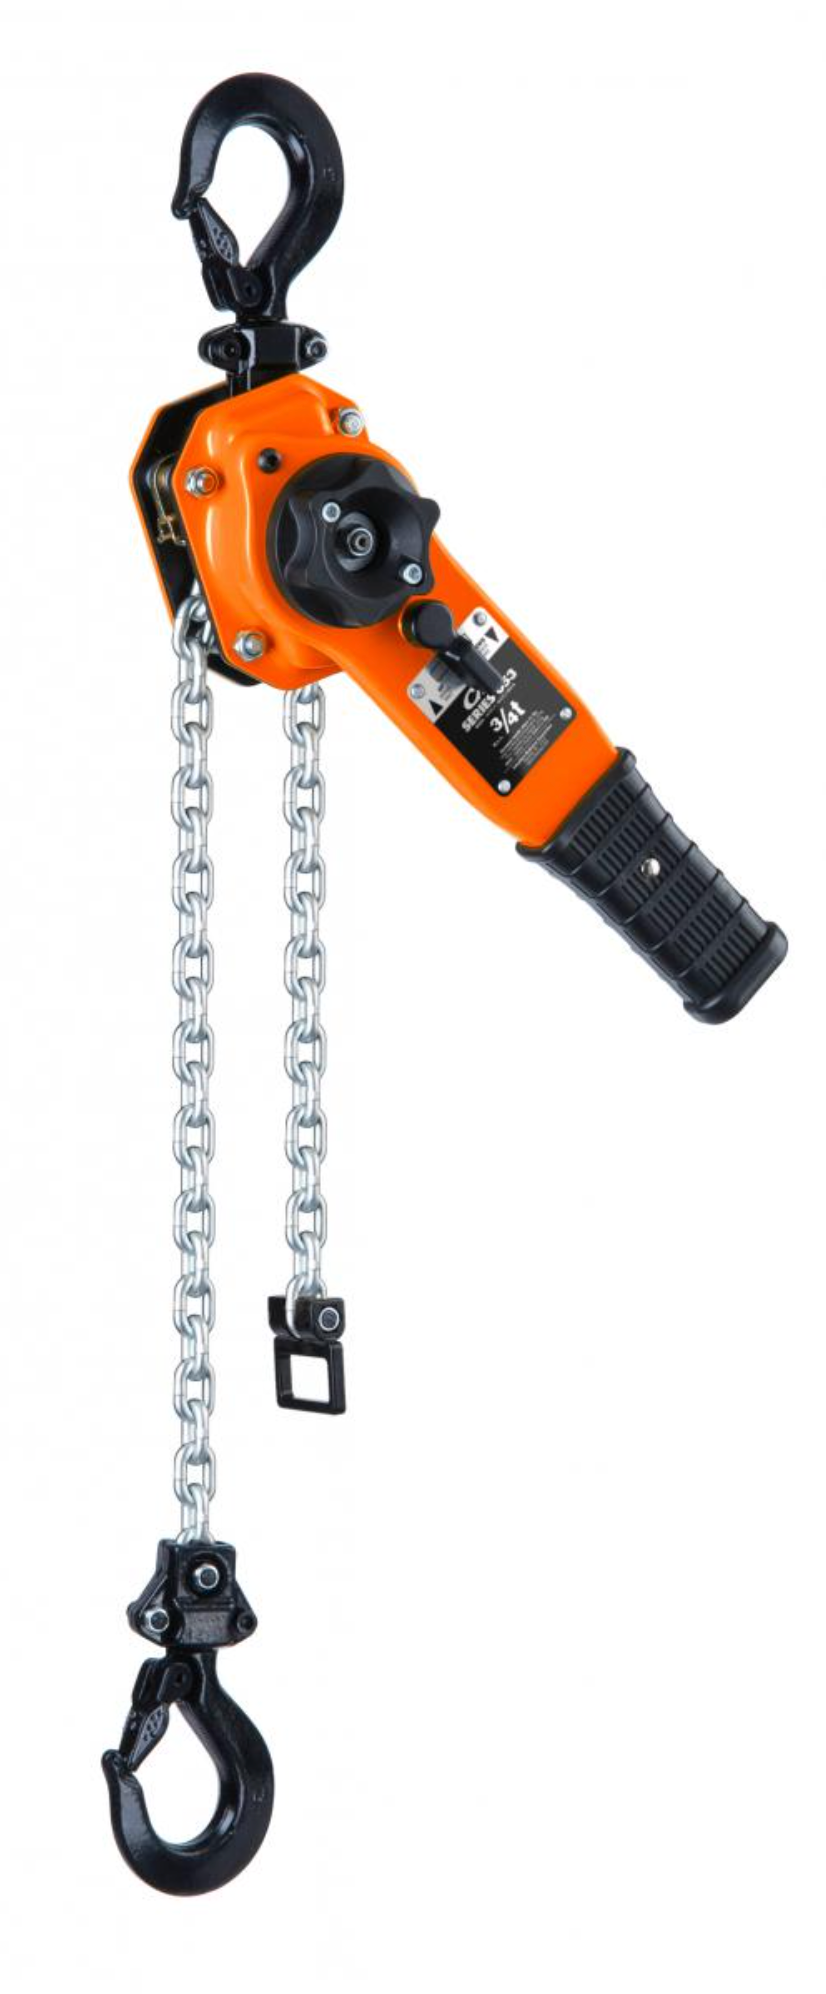 DO YOU NEED A LEVER HOIST? EVERYTHING YOU NEED TO KNOW